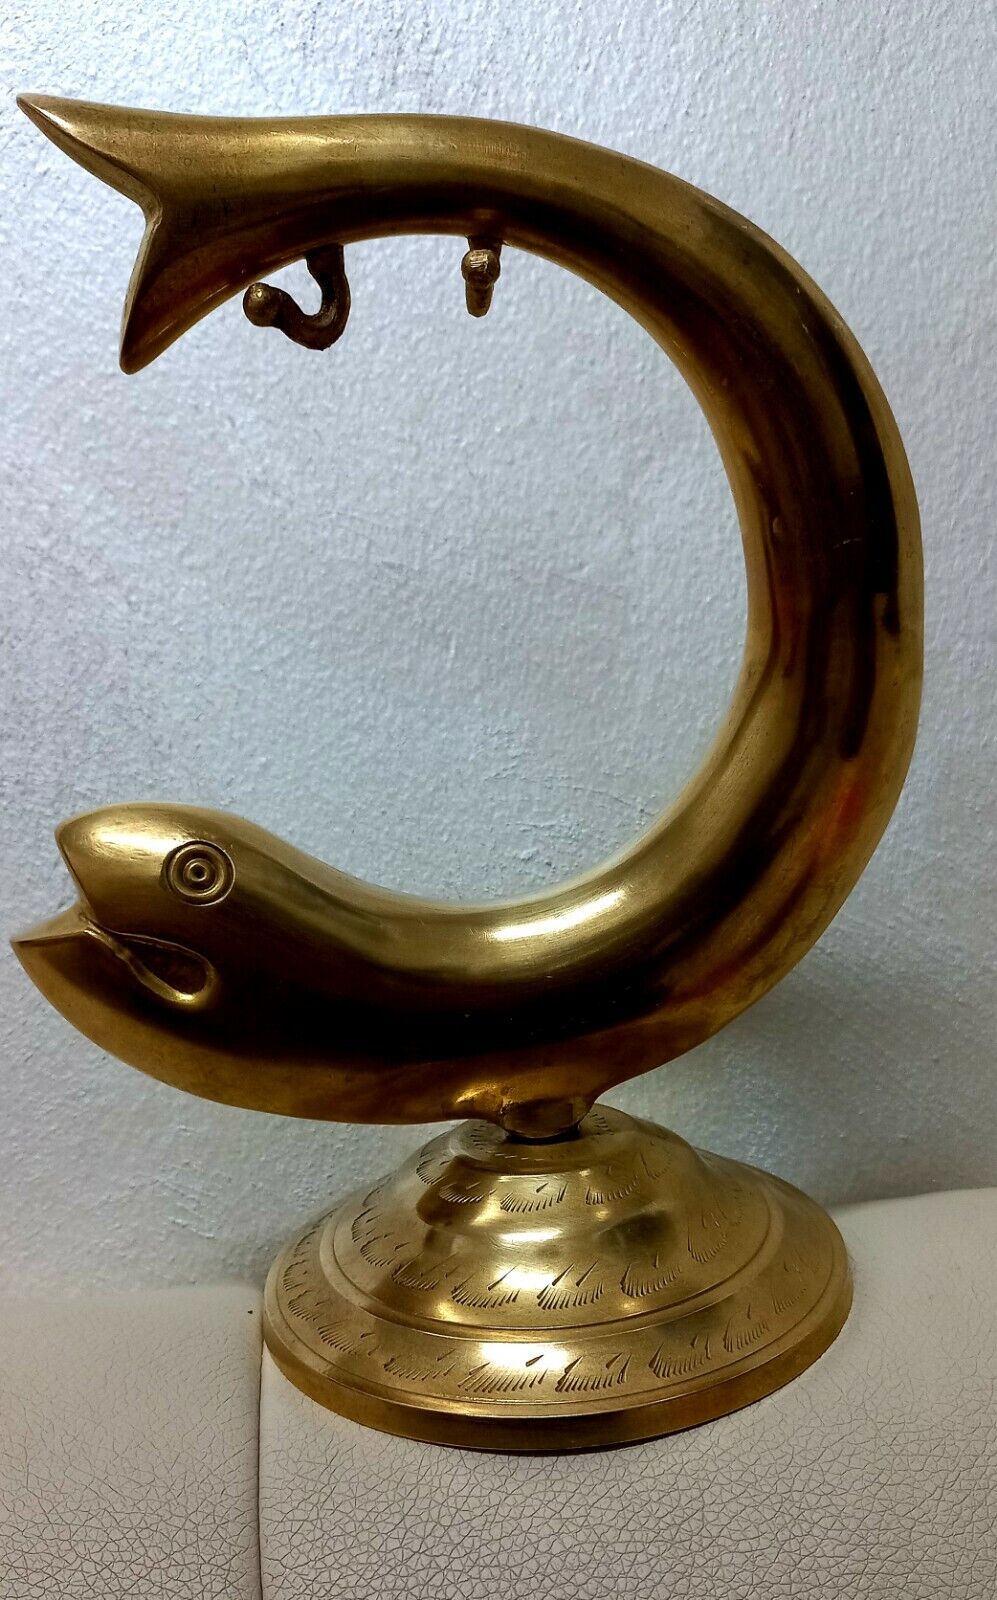 22.2 Oz ( 630 g ) Heavy Big VINTAGE Art Copper Fish Statue on a Stand - Ancient